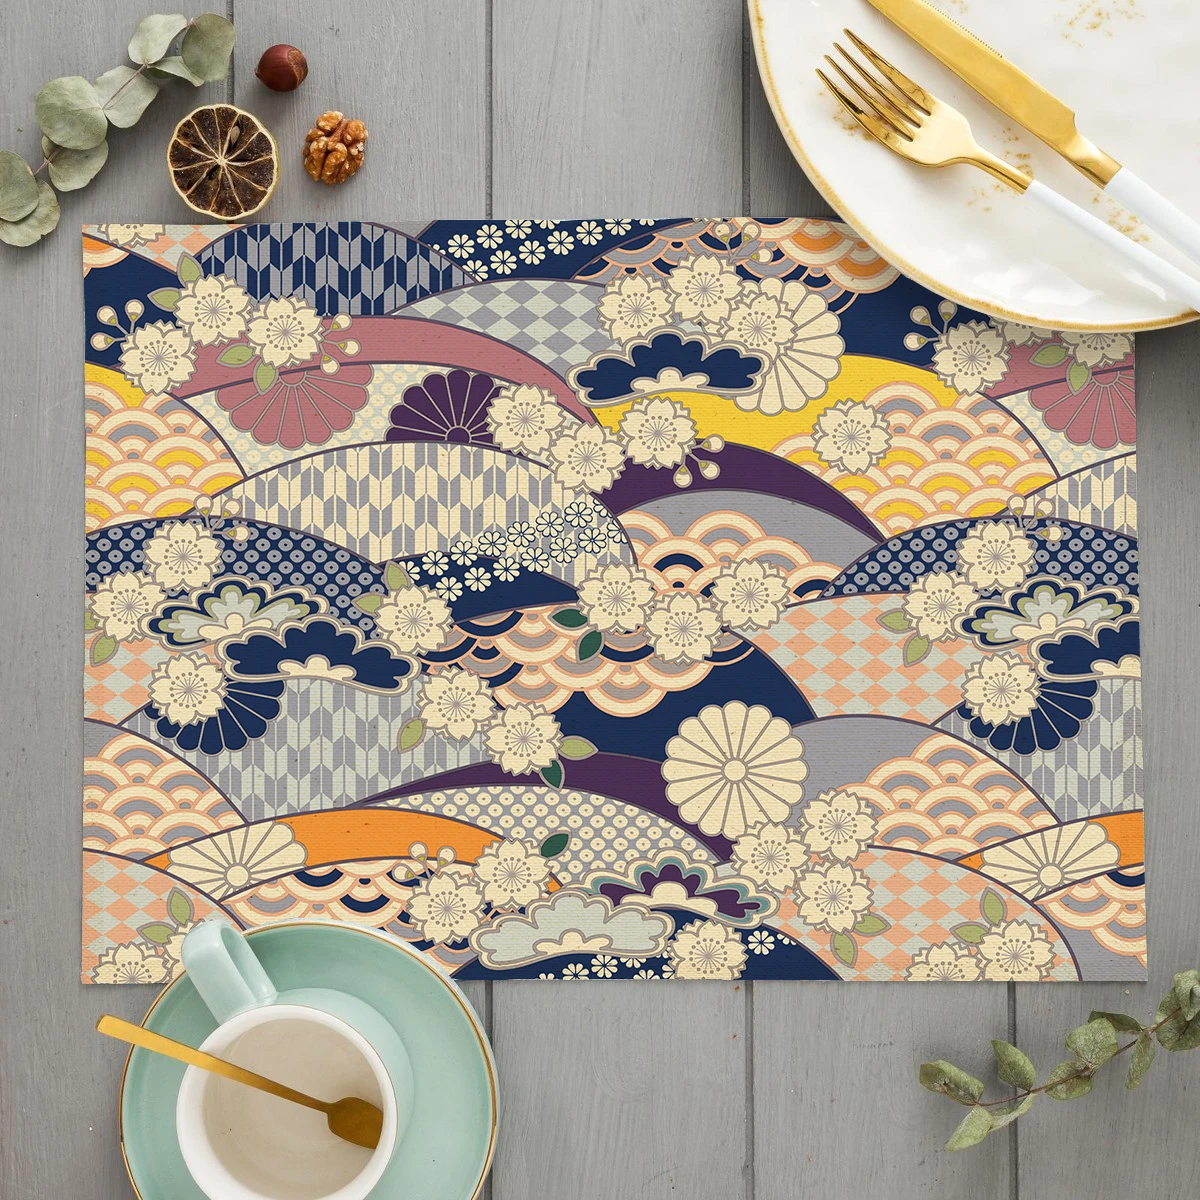 

Japanese Traditional Pattern Kitchen Placemat Cotton Linen Vintage Luxury Dining Table Mats Coaster Pad Bowl Cup Mat Home Decor